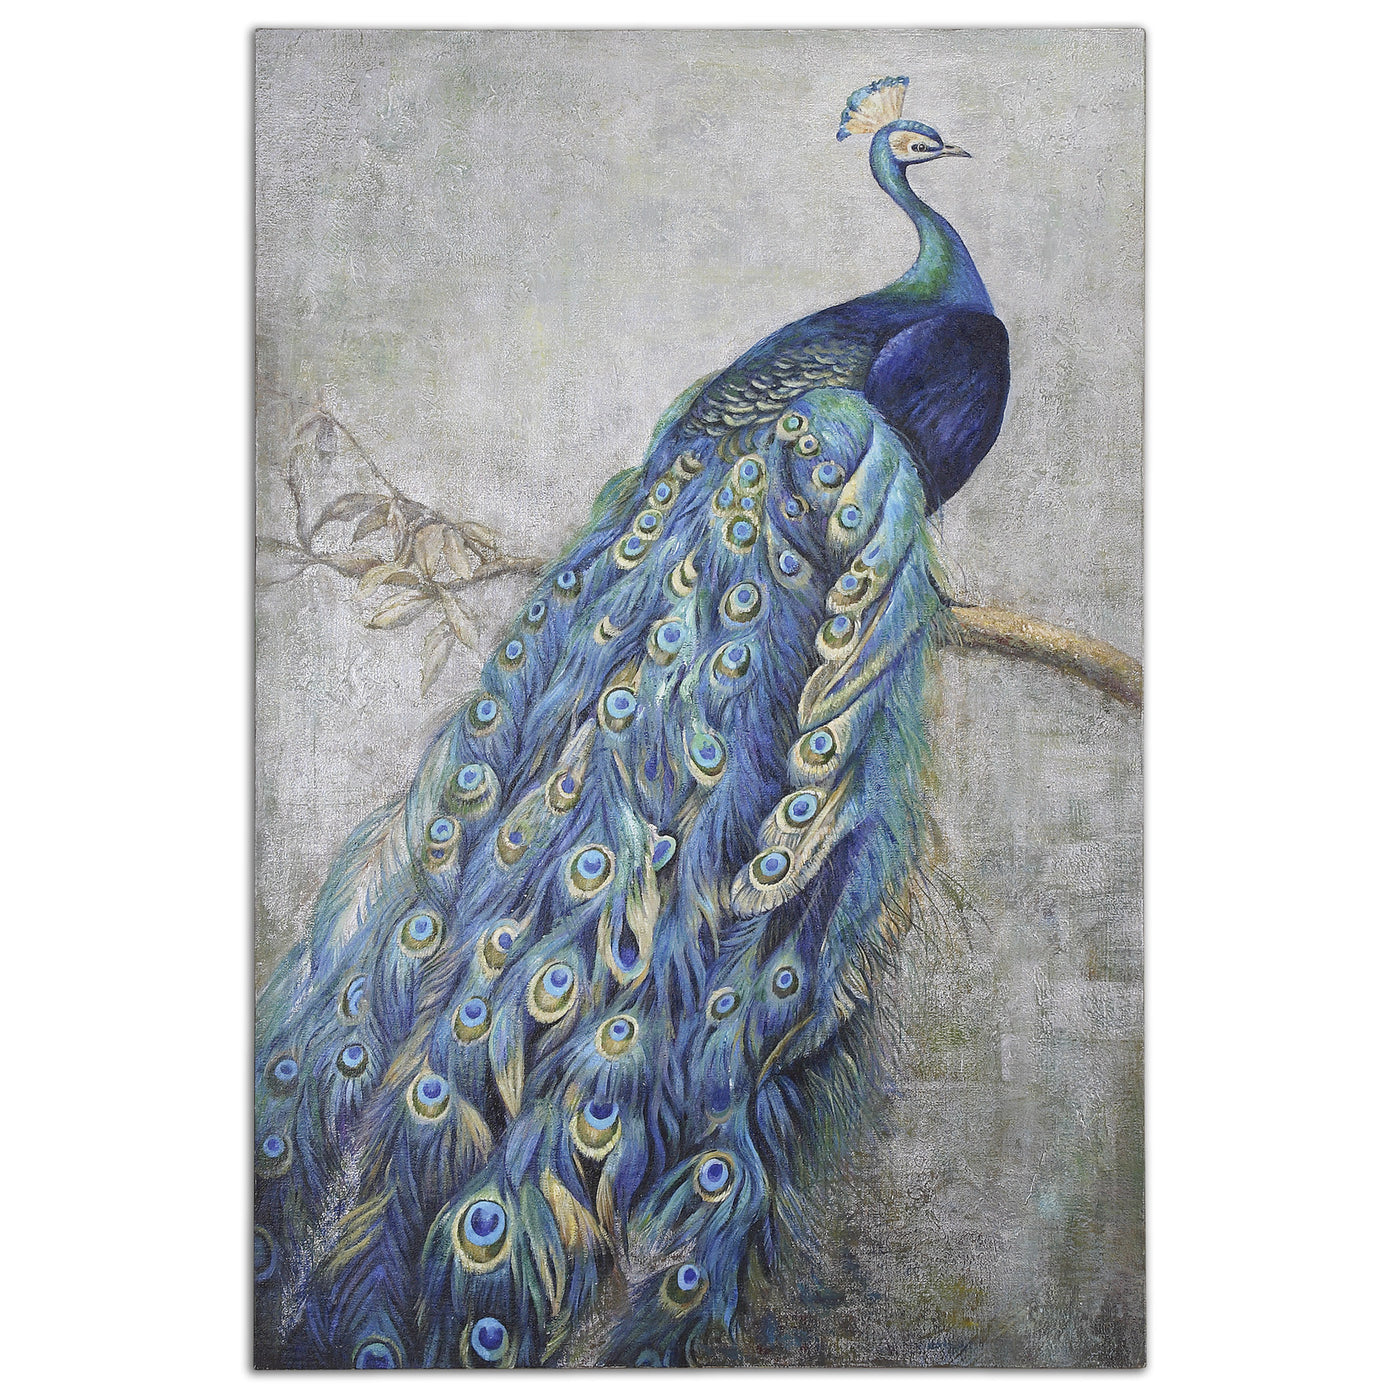 Refined Elegance Meets Eye-catching Vibrancy With This Hand Painted Peacock. Stunning Shades Of Turquoise, Green, And Yell...